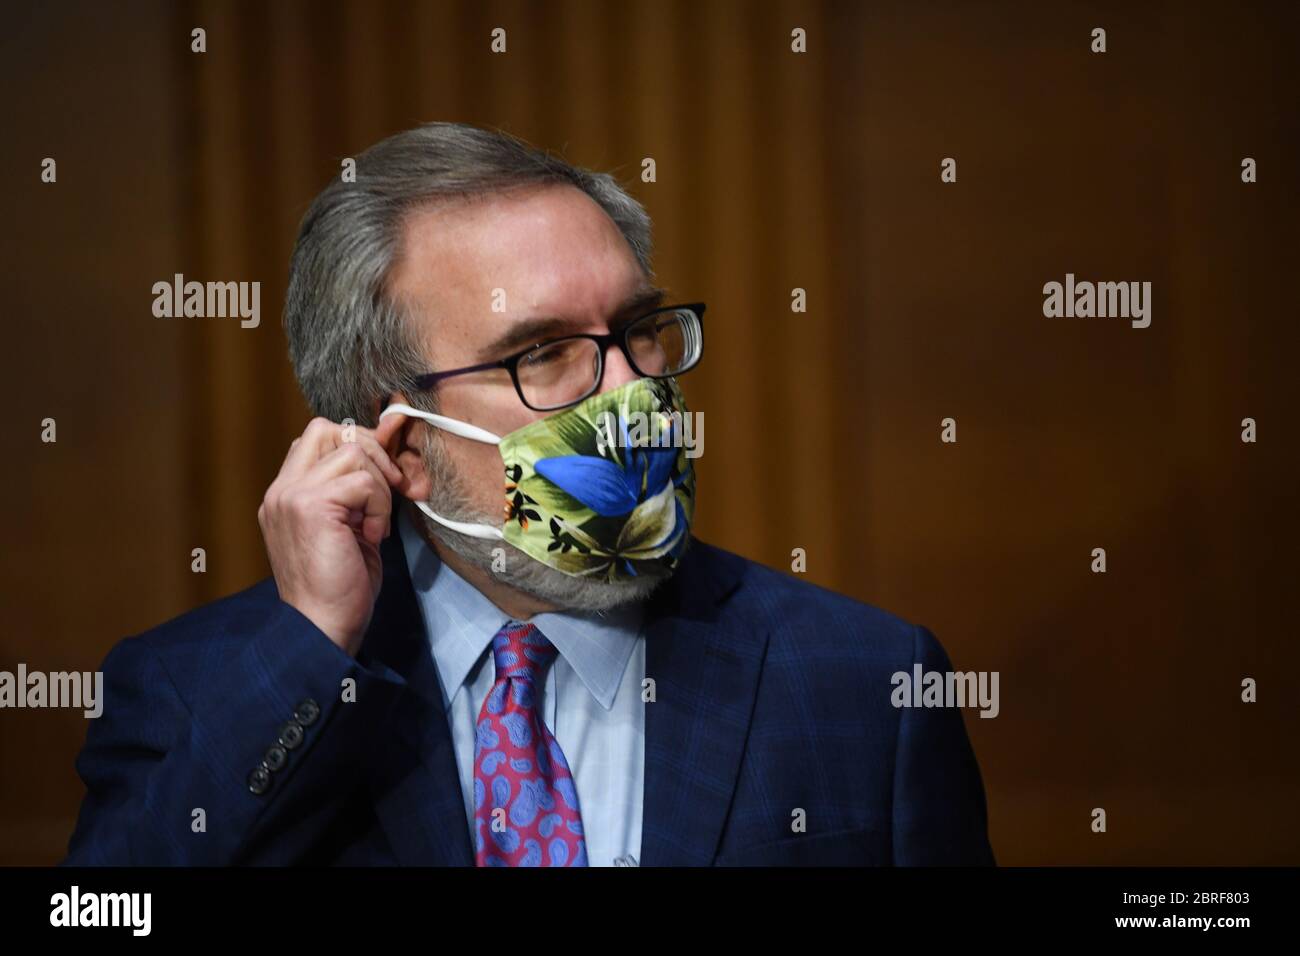 Andrew Wheeler, Administrator, United States Environmental Protection Agency (EPA) adjusts his mask at a hearing titled 'Oversight of the Environmental Protection Agency' in the Dirksen Senate Office Building on Wednesday, May 20, 2020 in Washington, DC. Wheeler will be asked about the rollback of regulations by the Environment Protection Agency since the pandemic started in March. Credit: Kevin Dietsch/Pool via CNP /MediaPunch Stock Photo